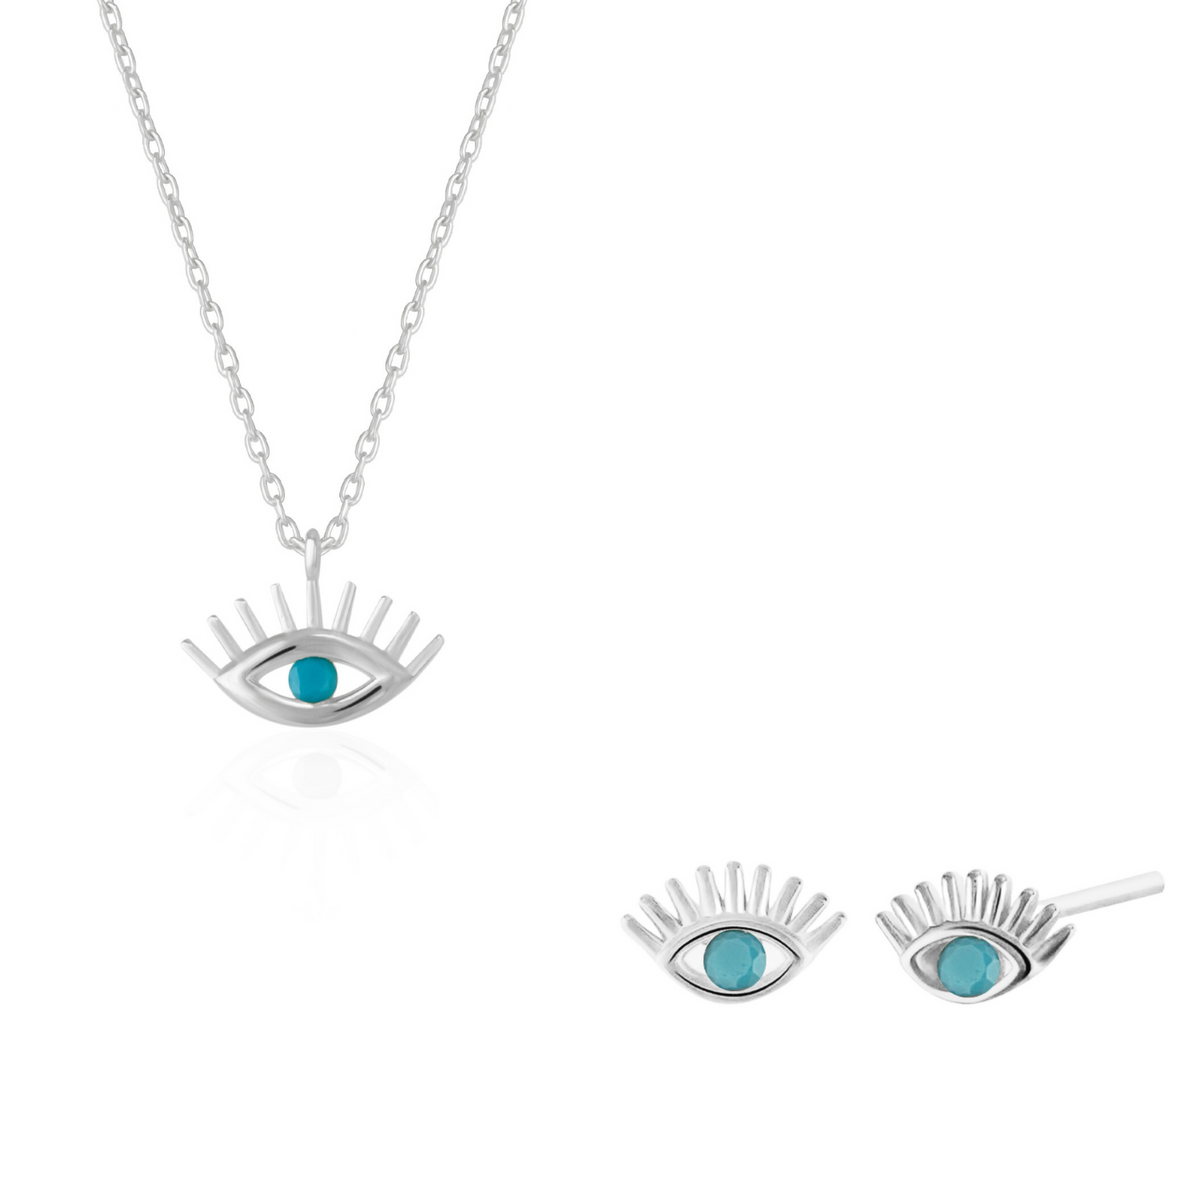 Turquoise Blue Eye Evil Eye Sterling Silver Necklace and Earring Set